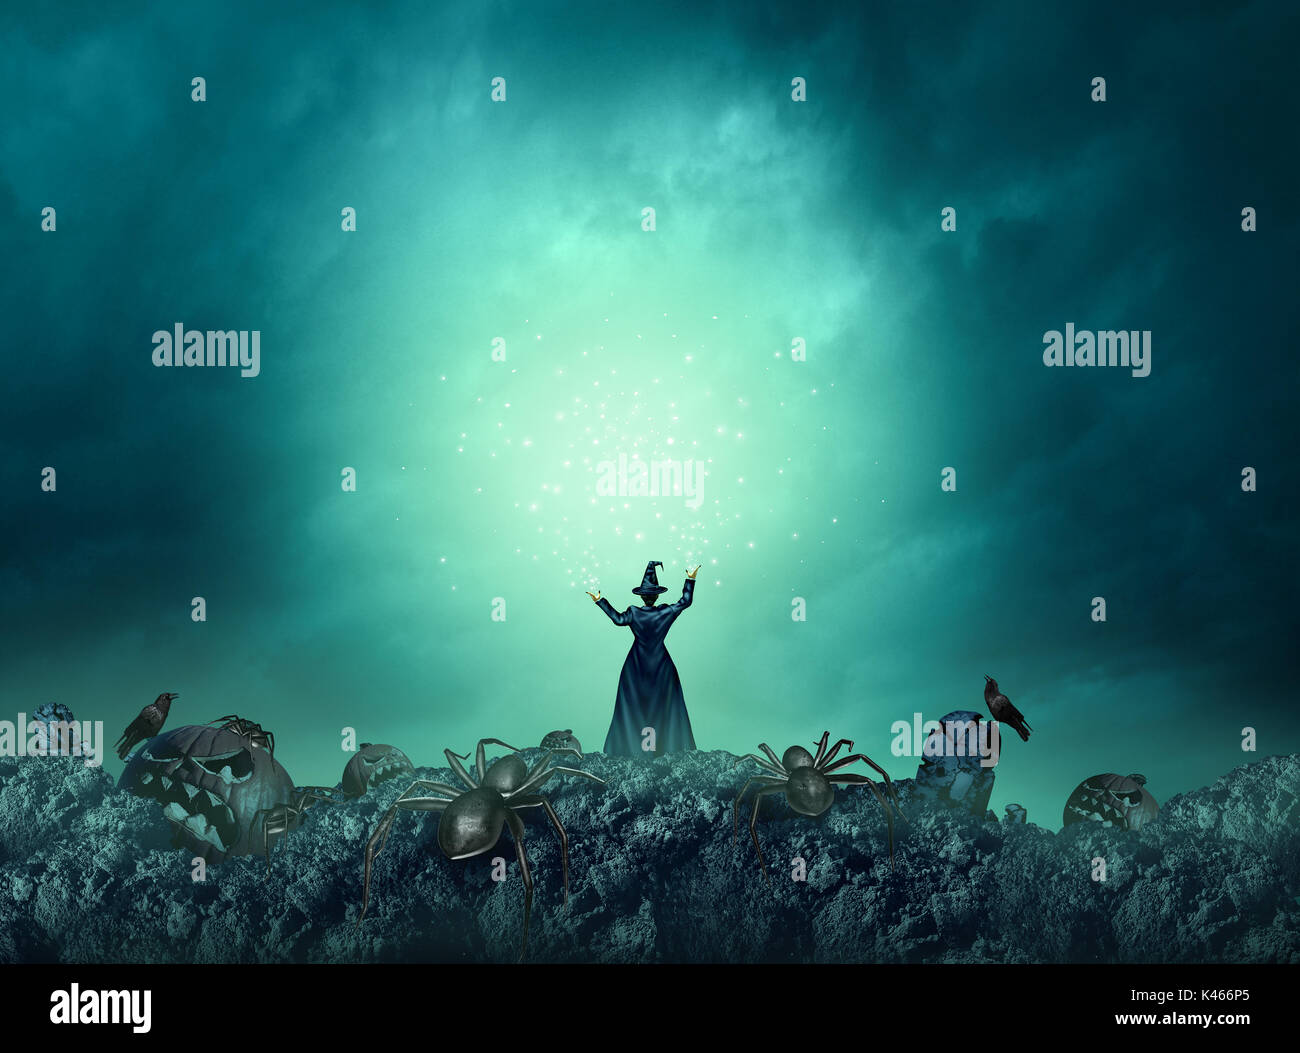 Magic witch halloween background as a wicked wizard casting a magical spell in a blank area for text as a spooky scary autumn holiday greeting. Stock Photo